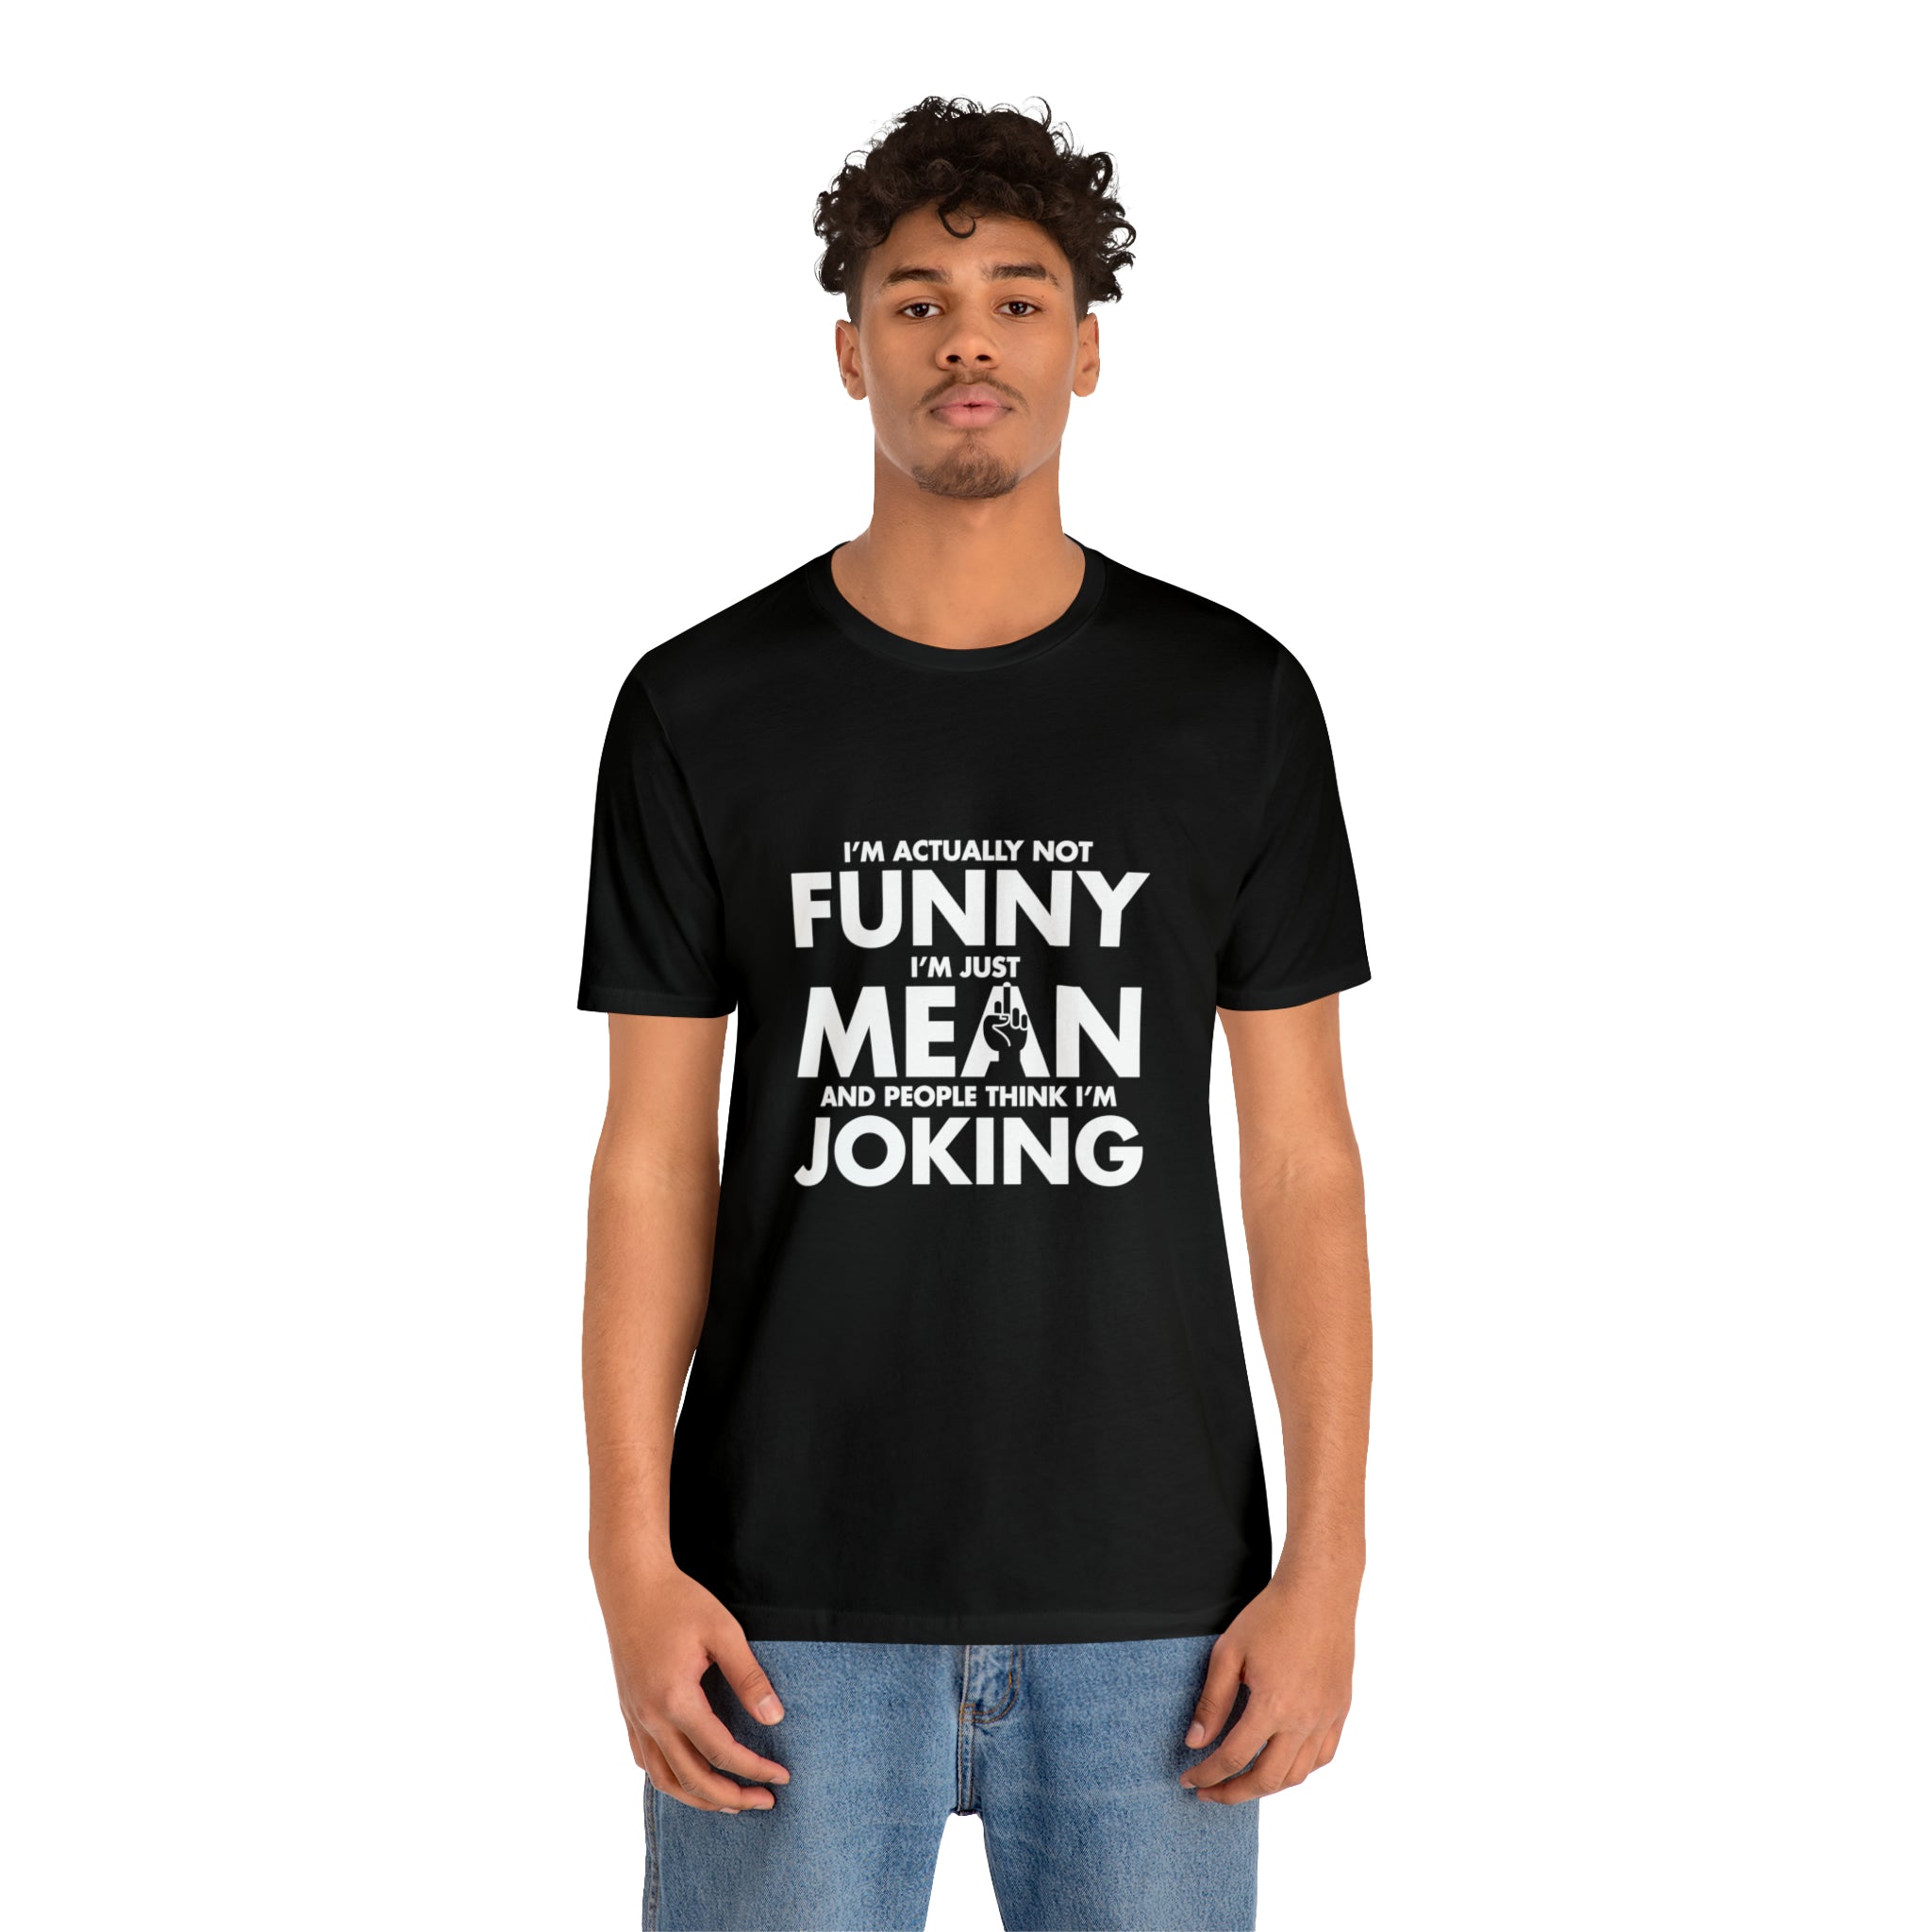 I am actually not funny I am just mean and people think I am joking T-Shirt